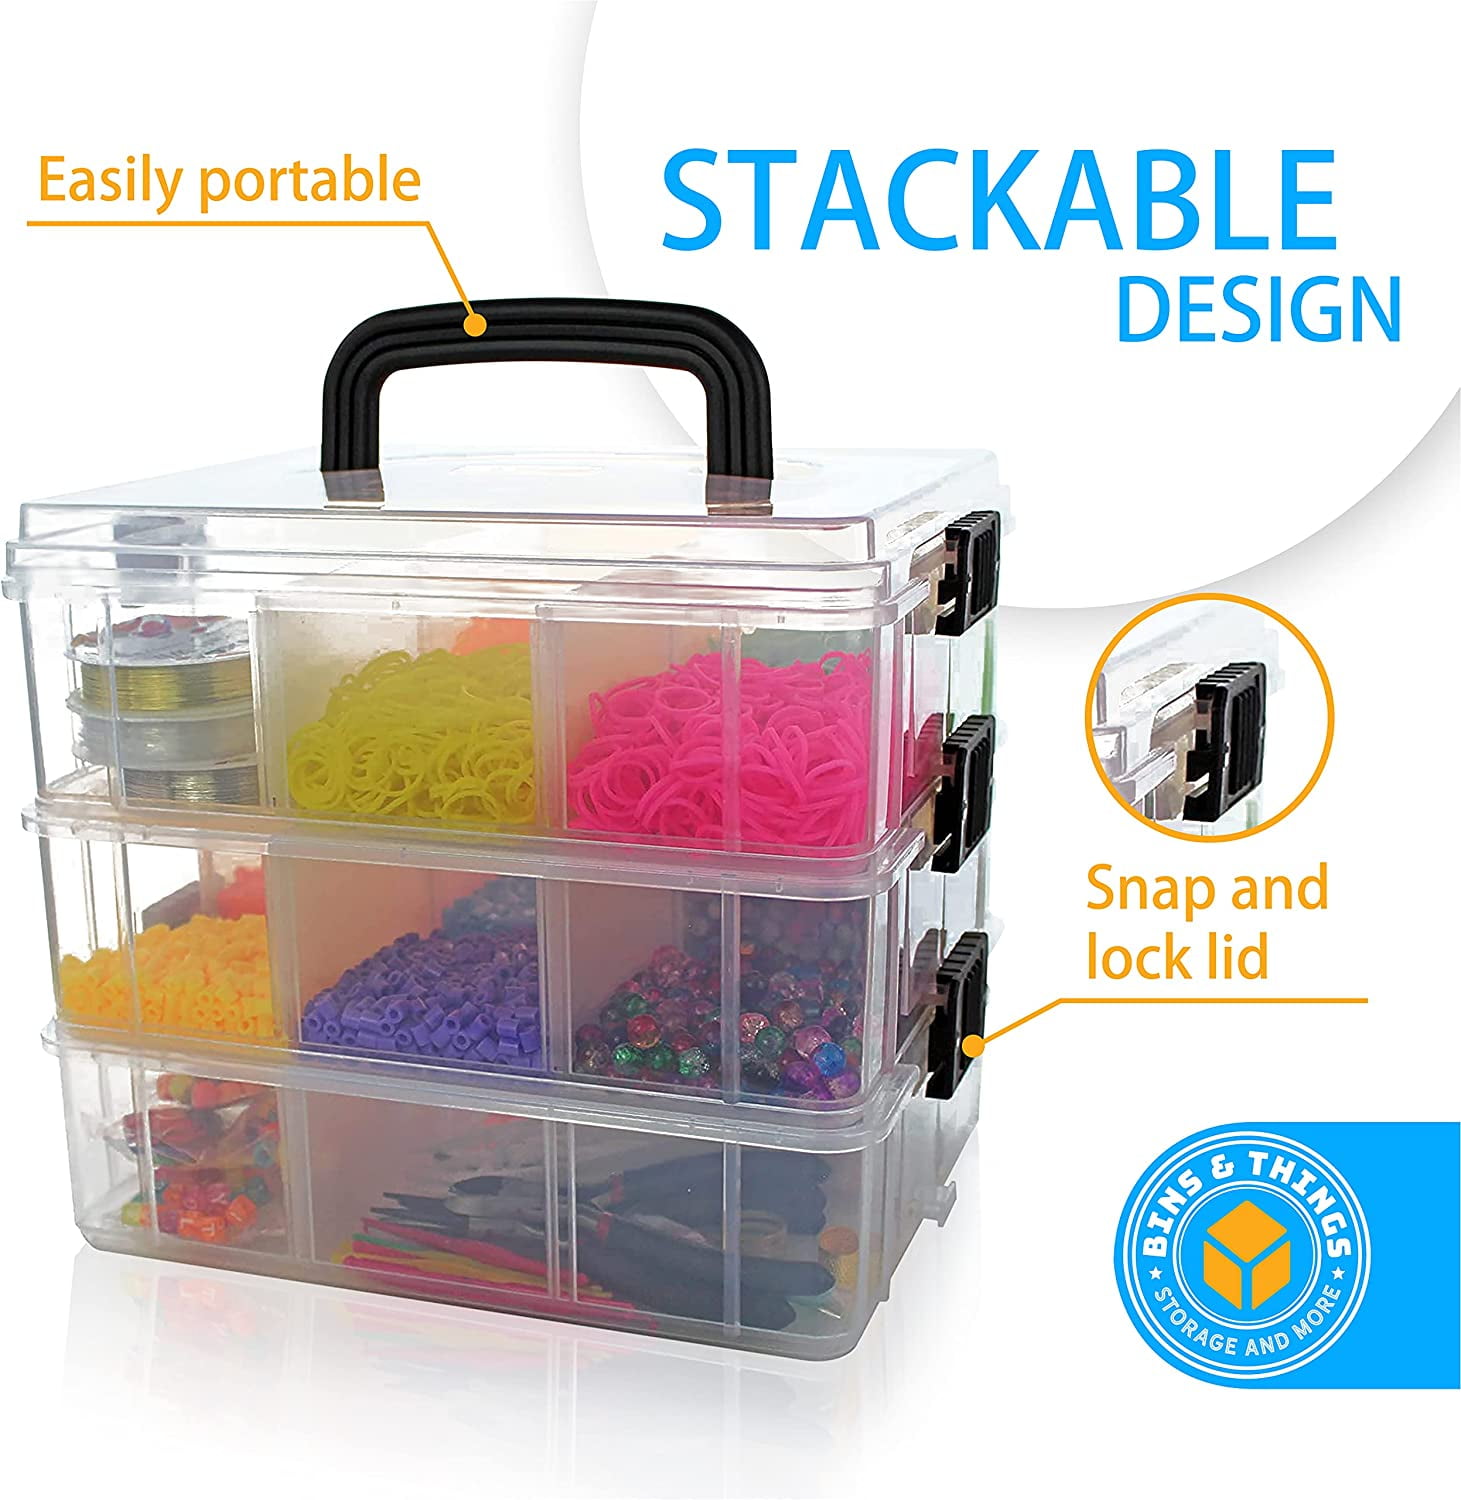 HOME4 BPA Free Stackable Storage Container Dolls Not Included Pink Glitter Small Perfect for Small Toys Organizer Carrying Display Case 3 Layers 30 Adjustable Compartments Bonus Sticker 